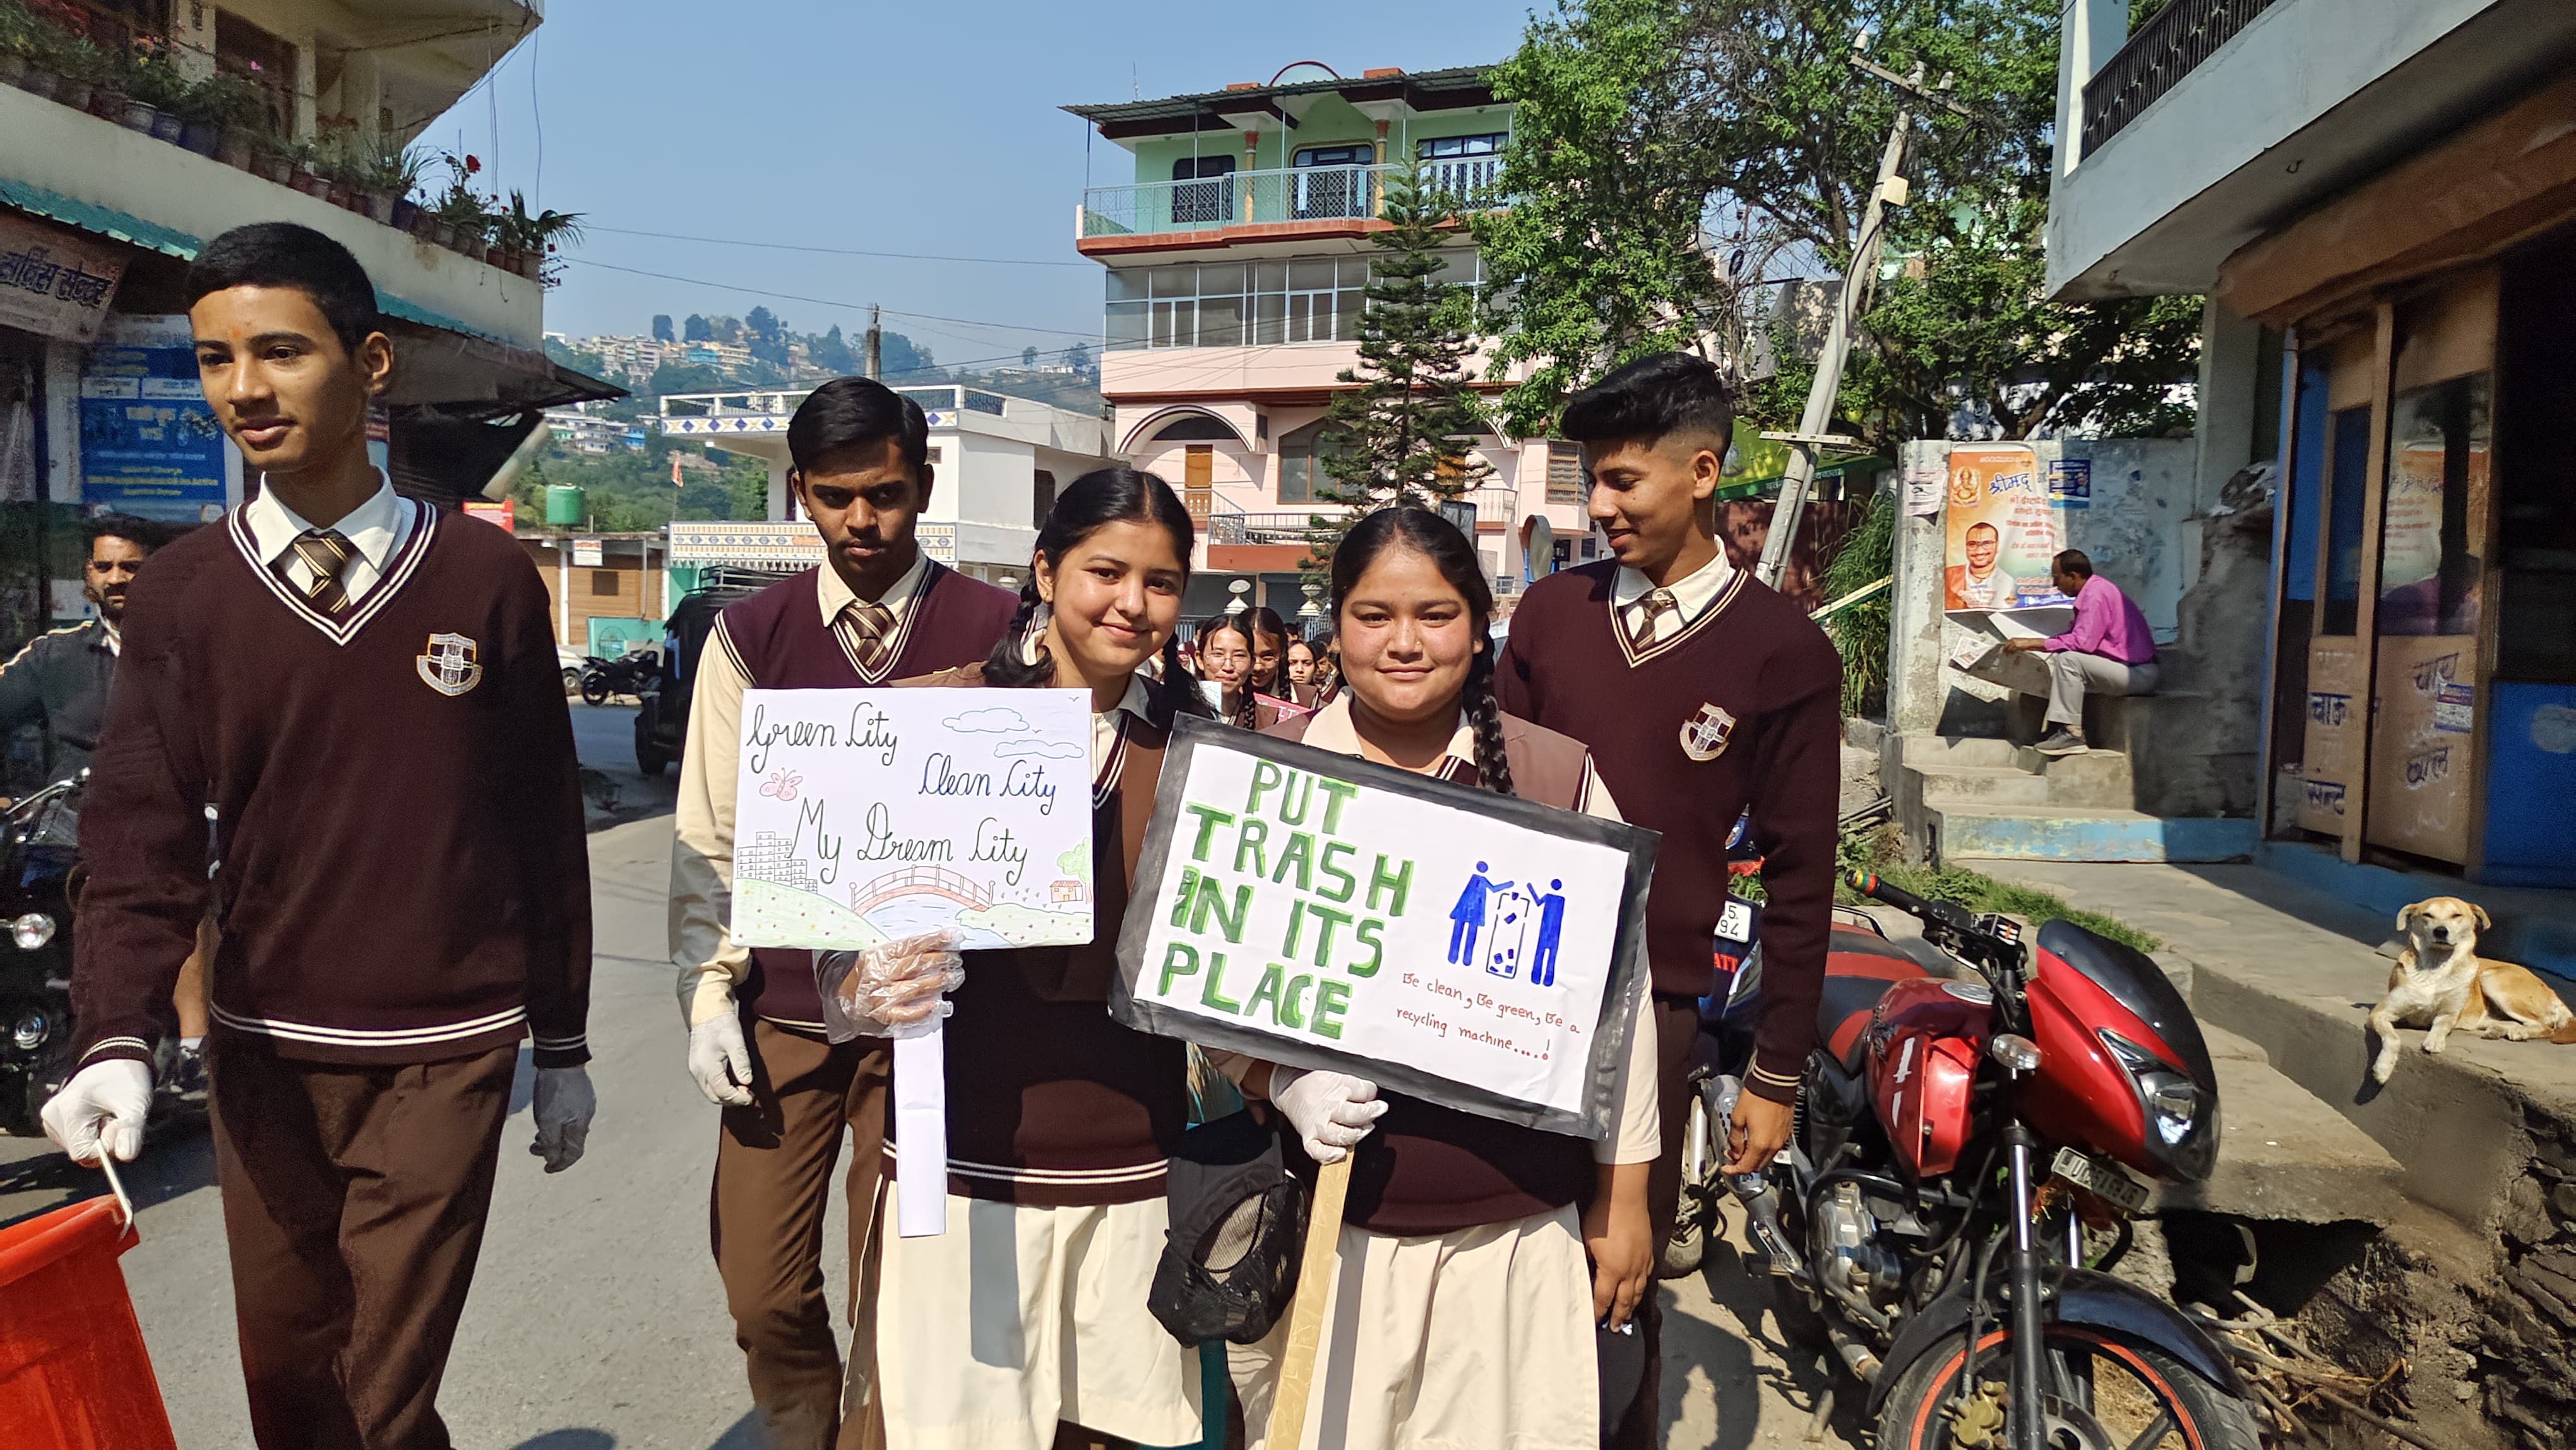 Cleanliness Drive by Eco Club Members